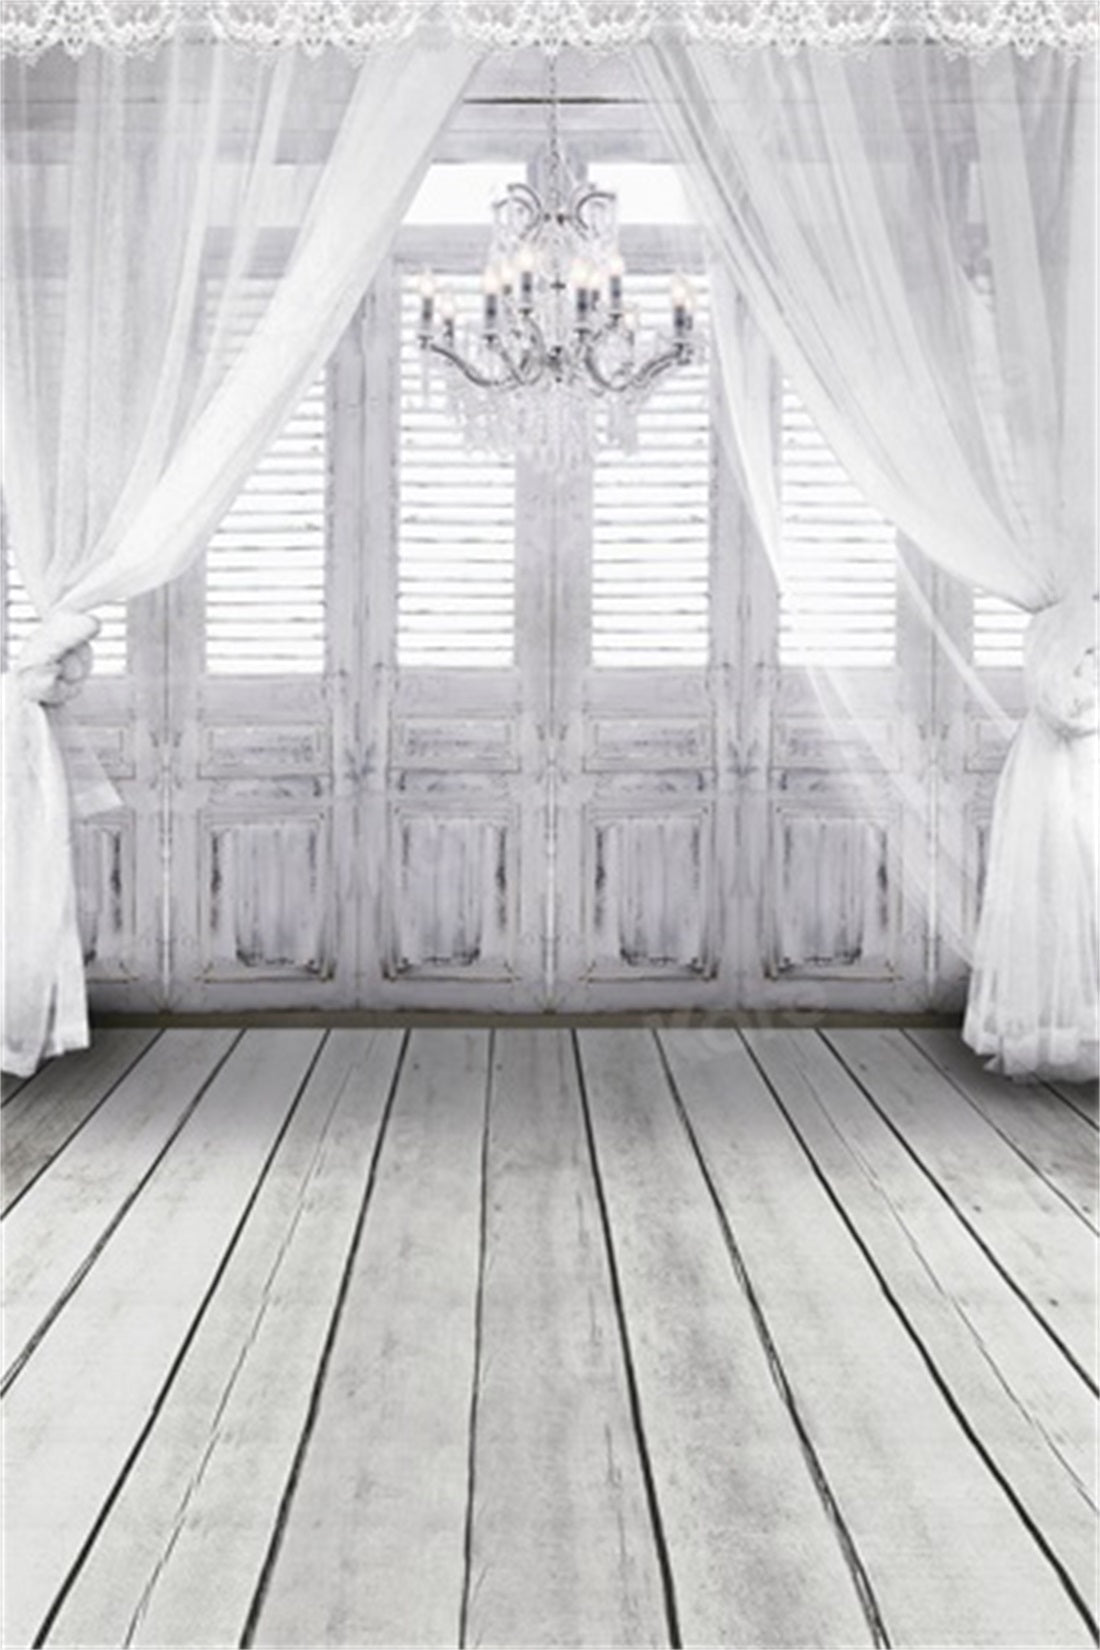 Kate windows with white sheer curtains chandelier floor Backdrop - Katebackdrop